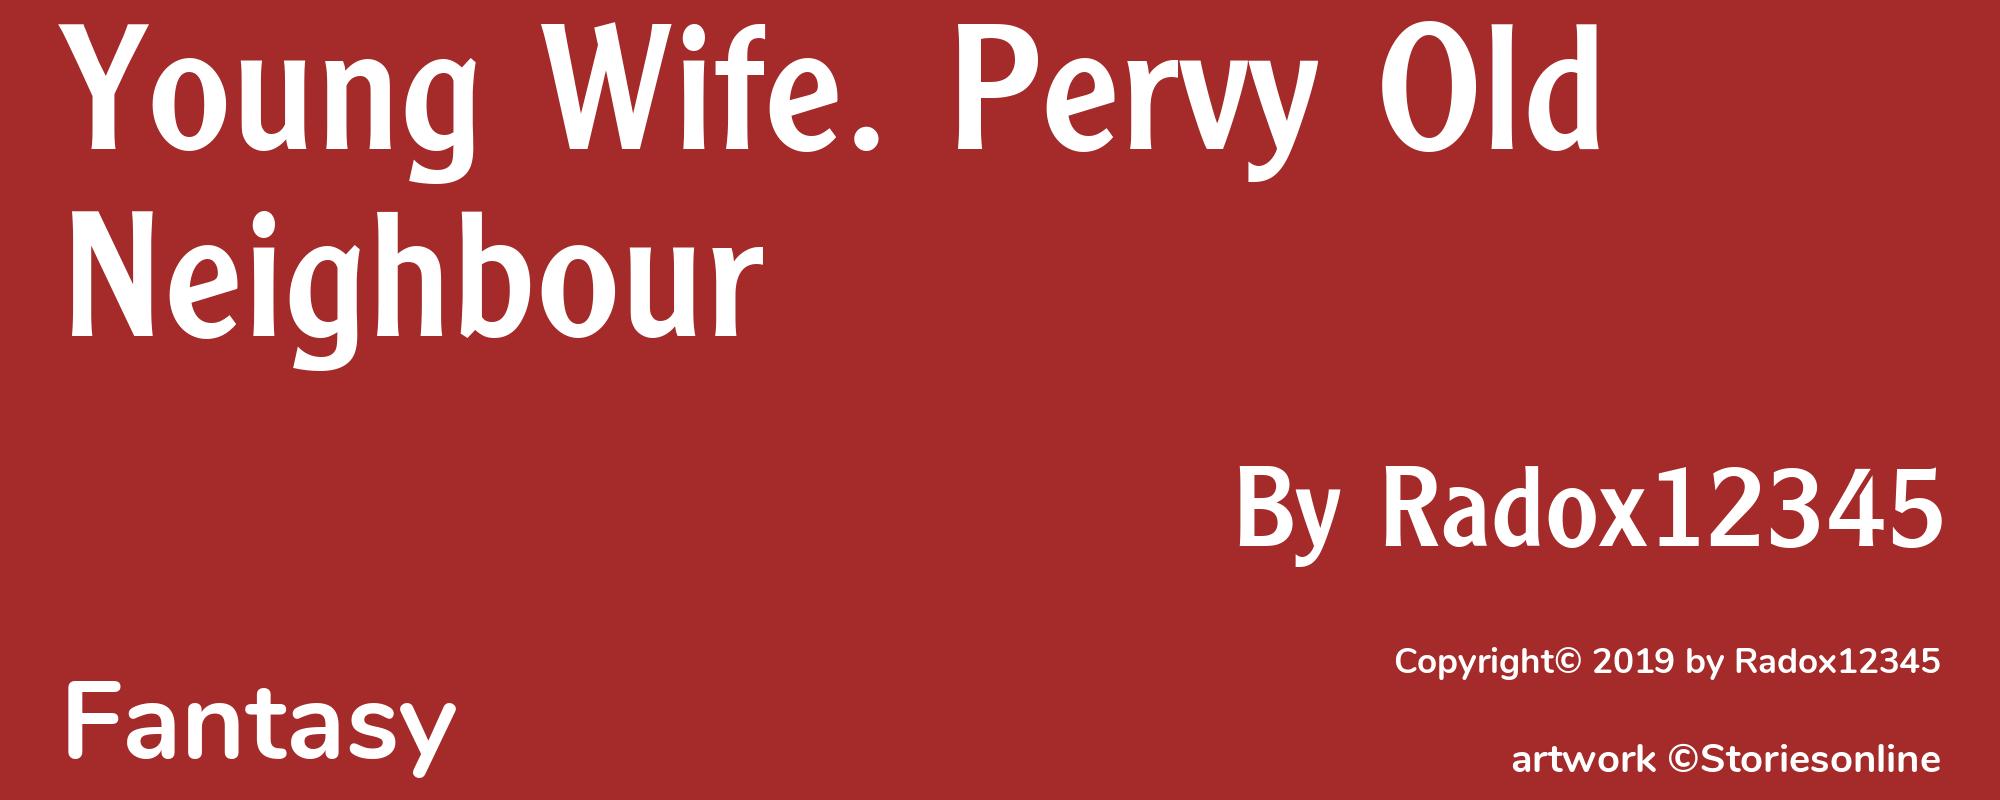 Young Wife. Pervy Old Neighbour - Cover